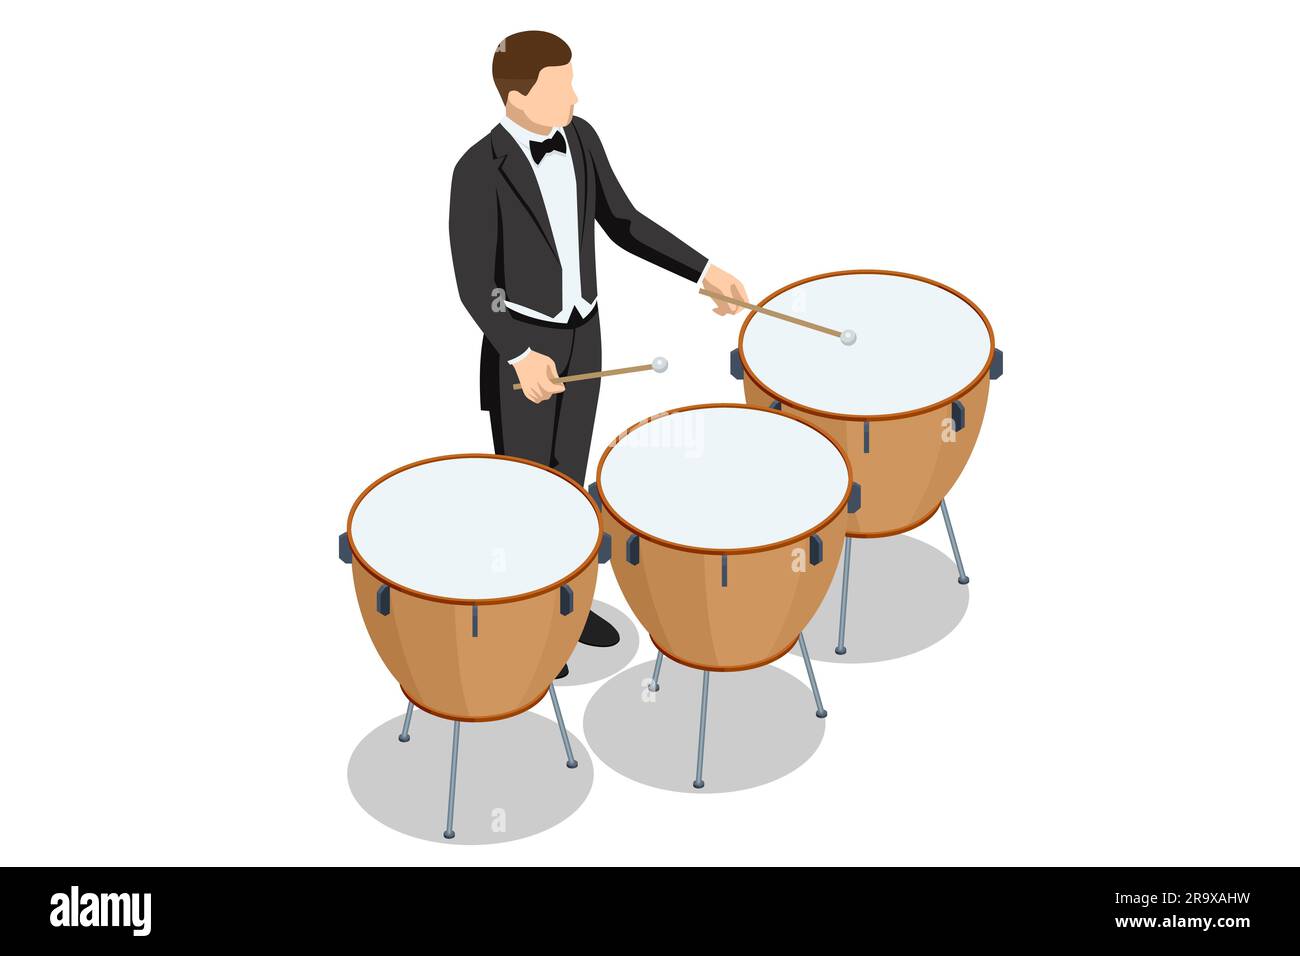 Isometric brown timpani isolated on white background. Timpani percussion musical instrument Stock Vector